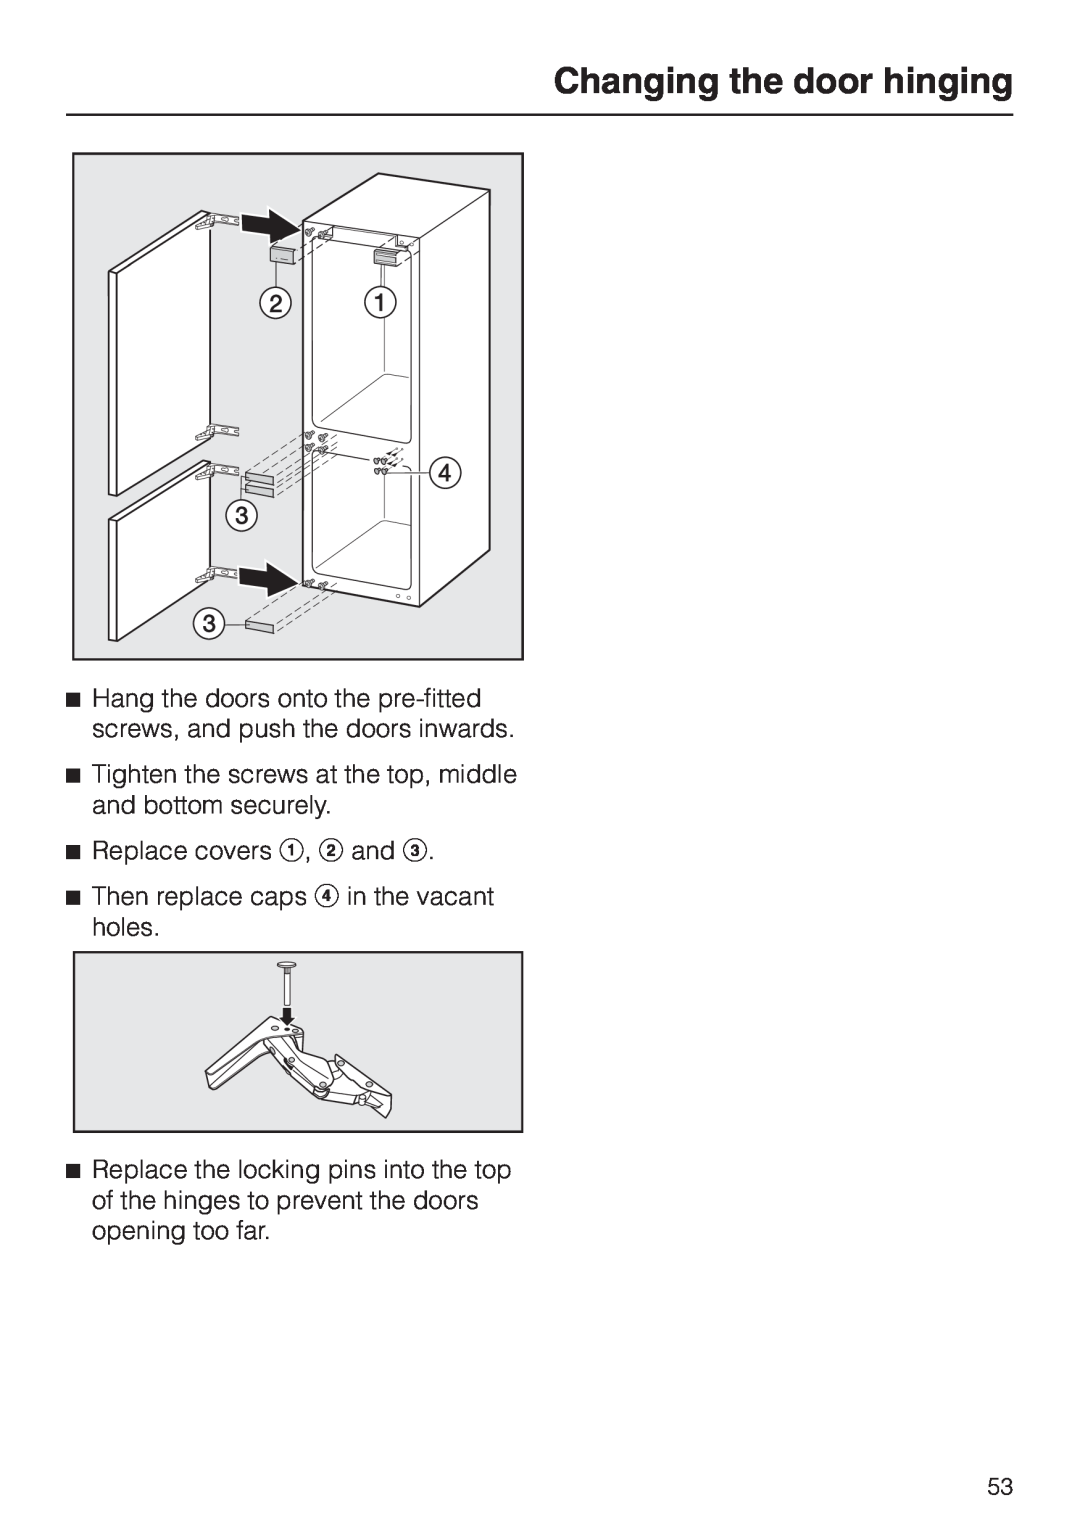 Miele KF 9757 ID installation instructions Changing the door hinging, Replace covers a, b and c 